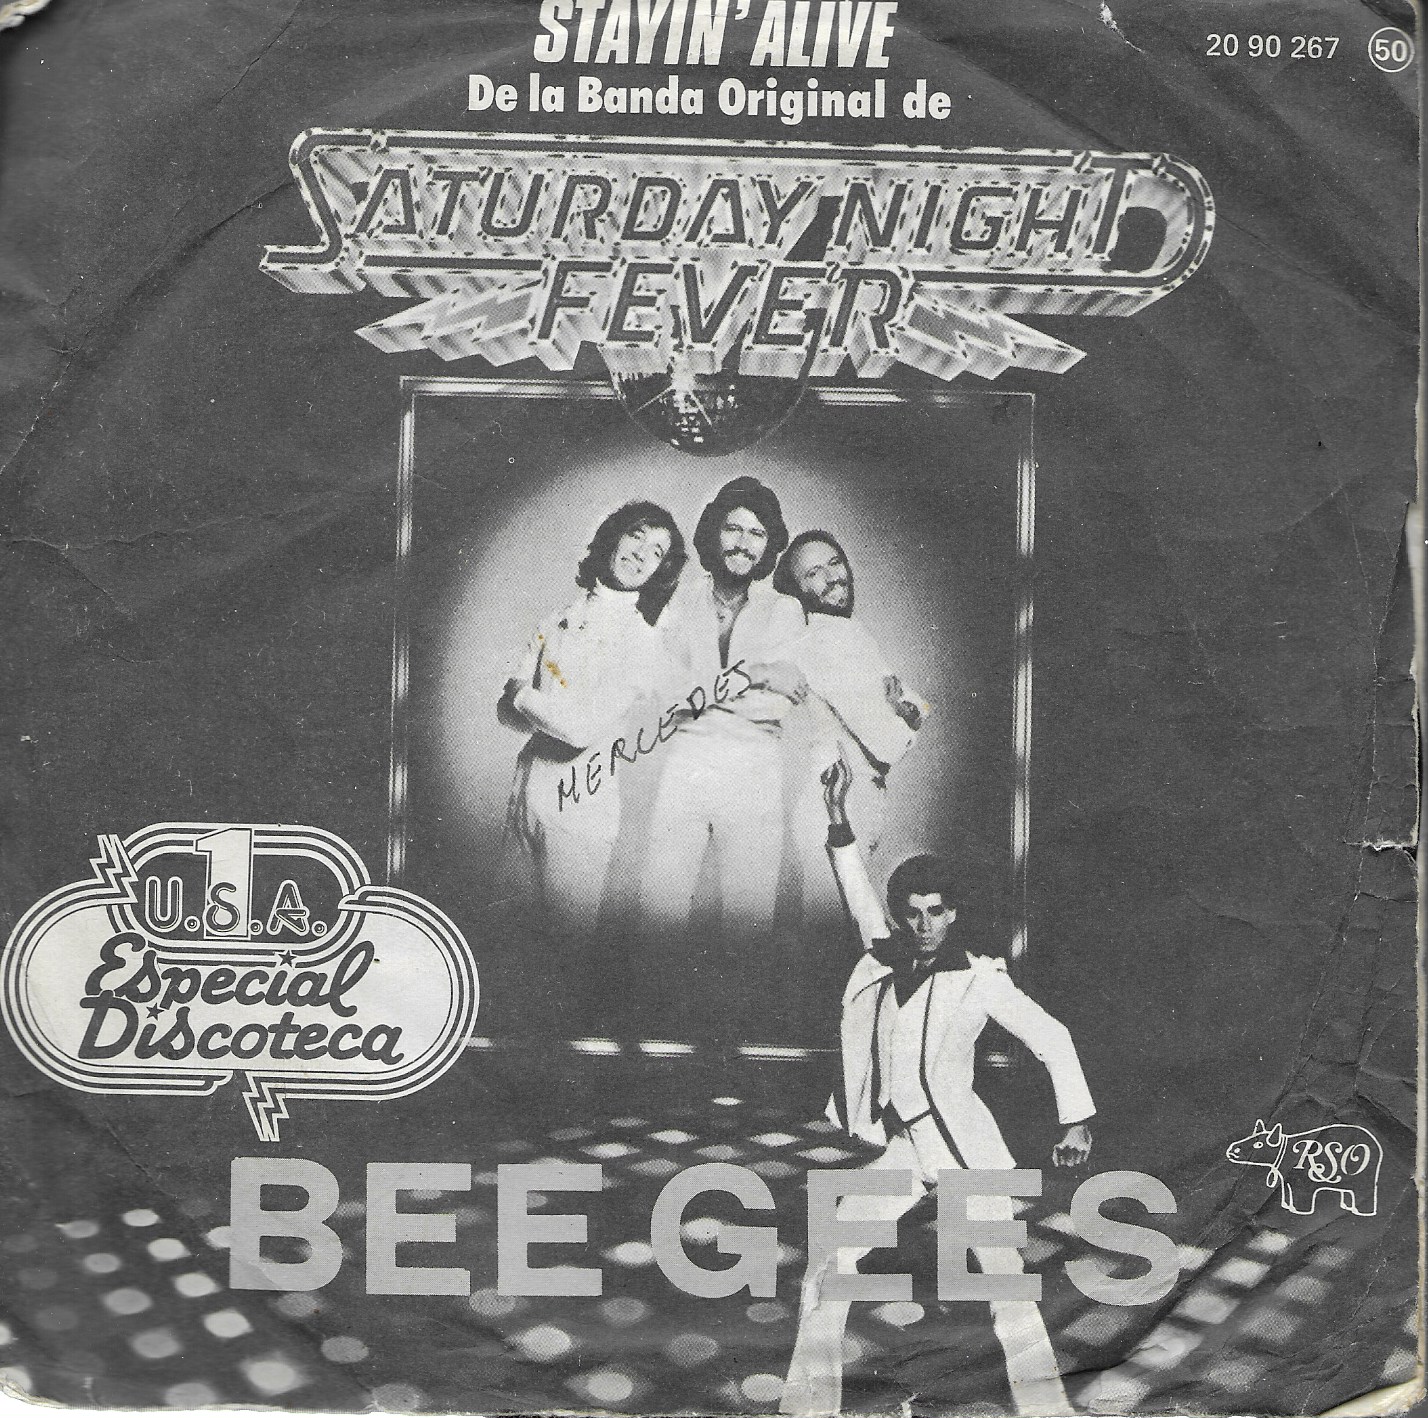 Bee Gees. Stayin' Alive. Saturday Night Fever. 45RPM SP 2 títulos: Stayin' Alive/If I cant have you